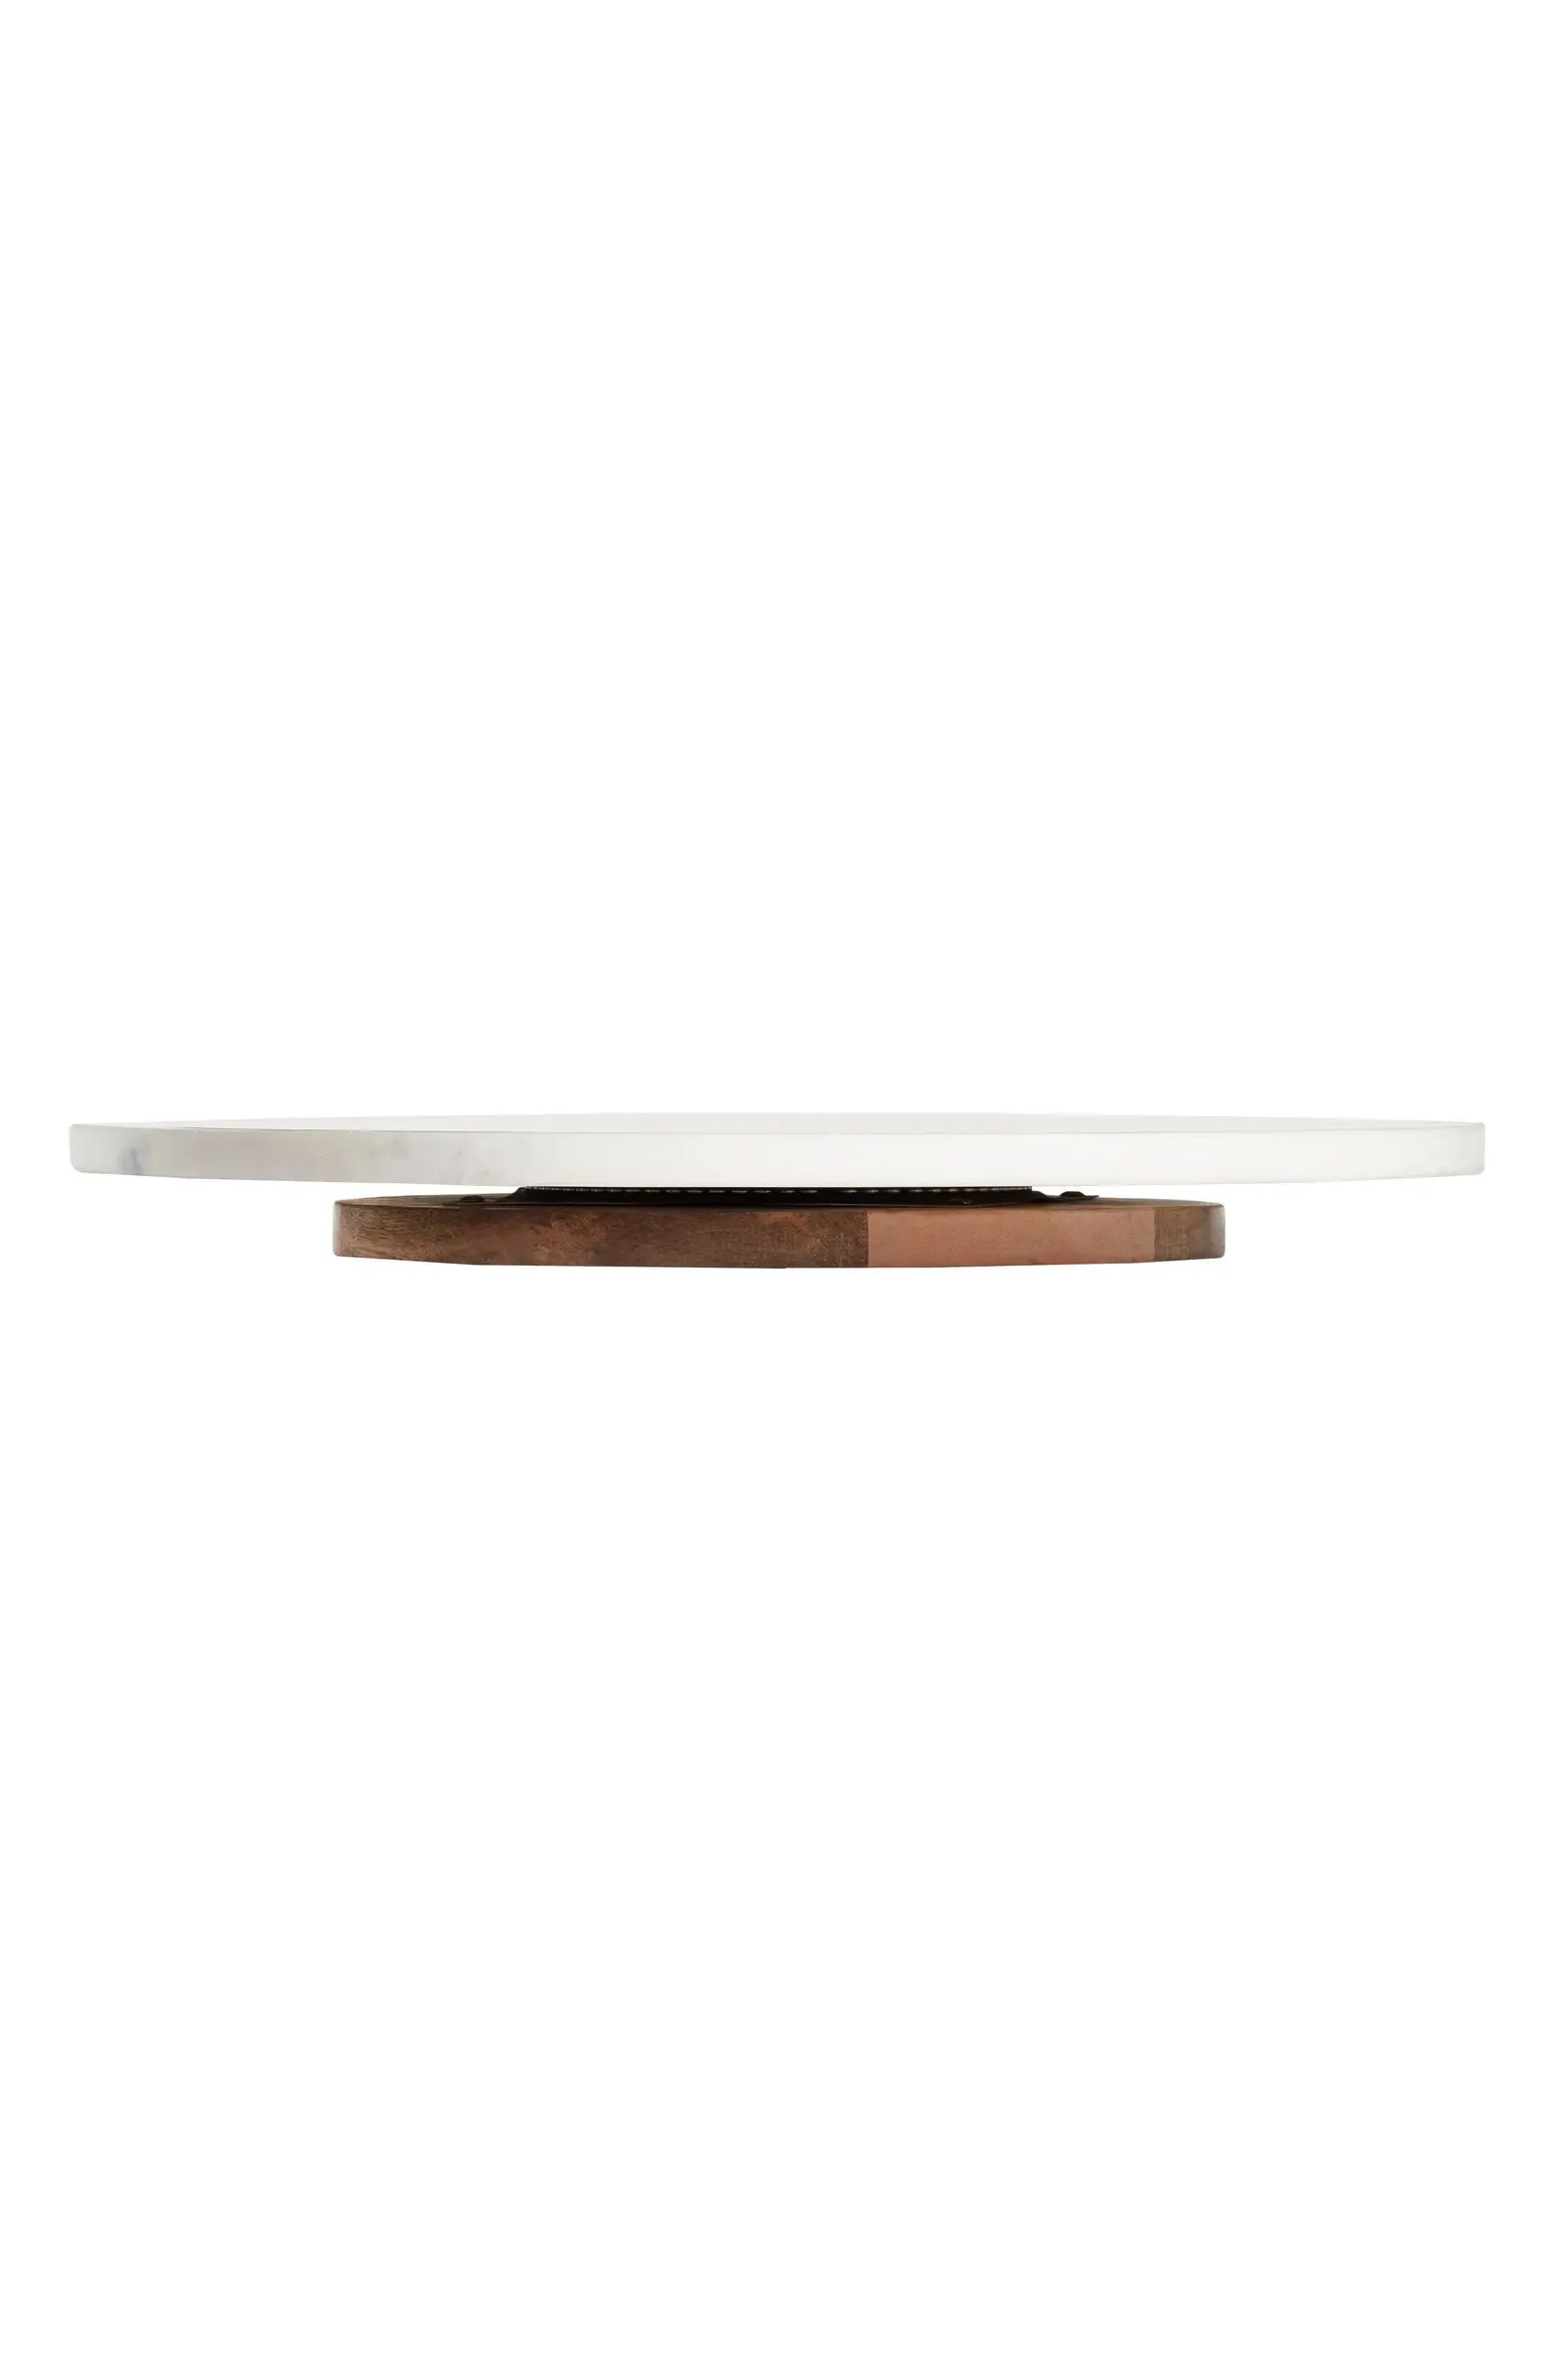 Nordstrom at Home Marble & Acacia Wood Lazy Susan | Nordstrom | Nordstrom